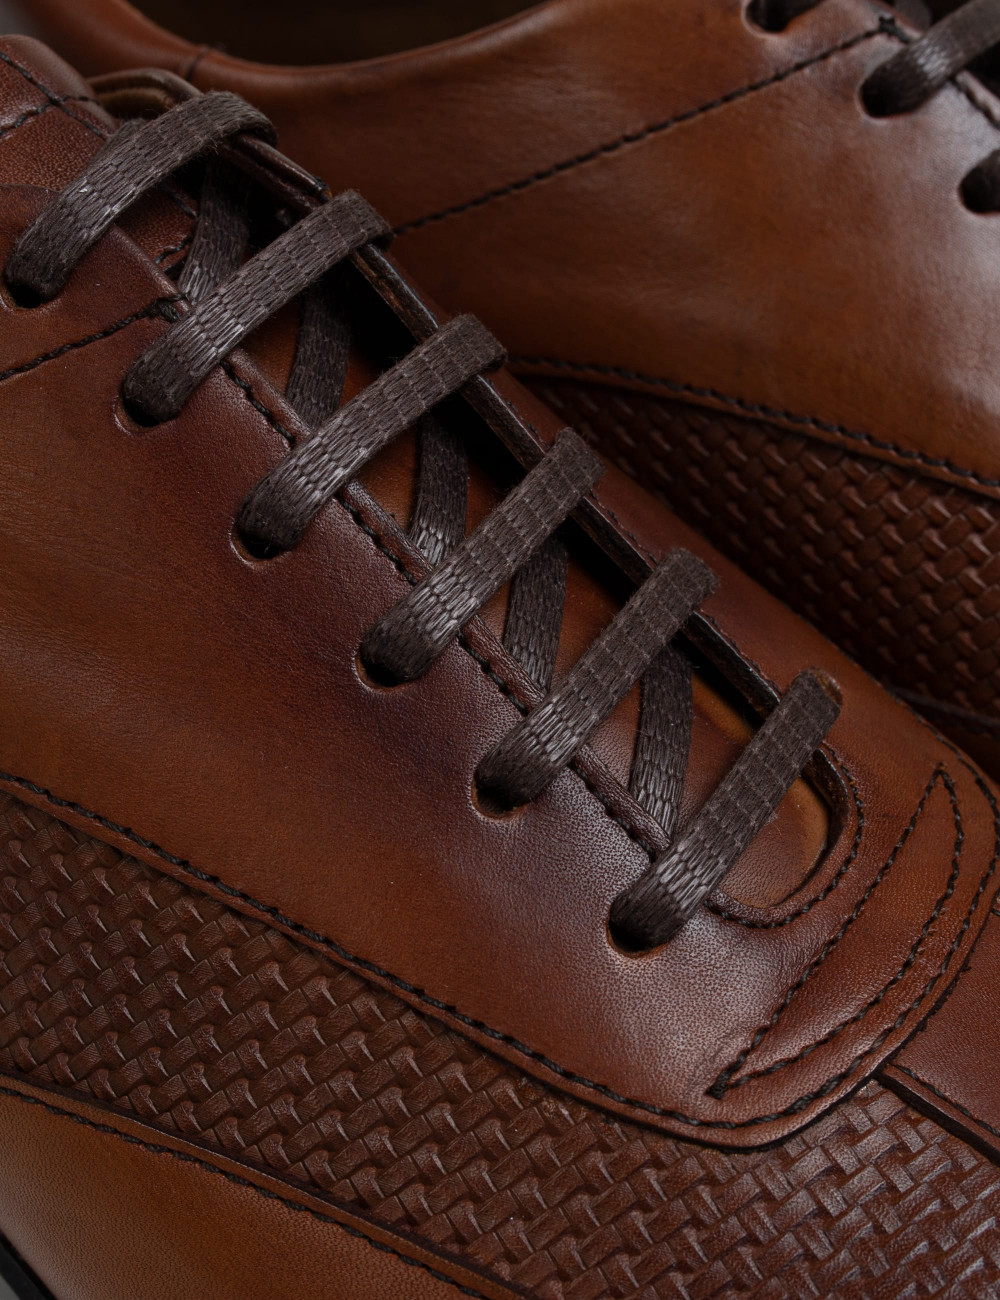 Tan  Leather Lace-up Shoes - 01686MTBAC01